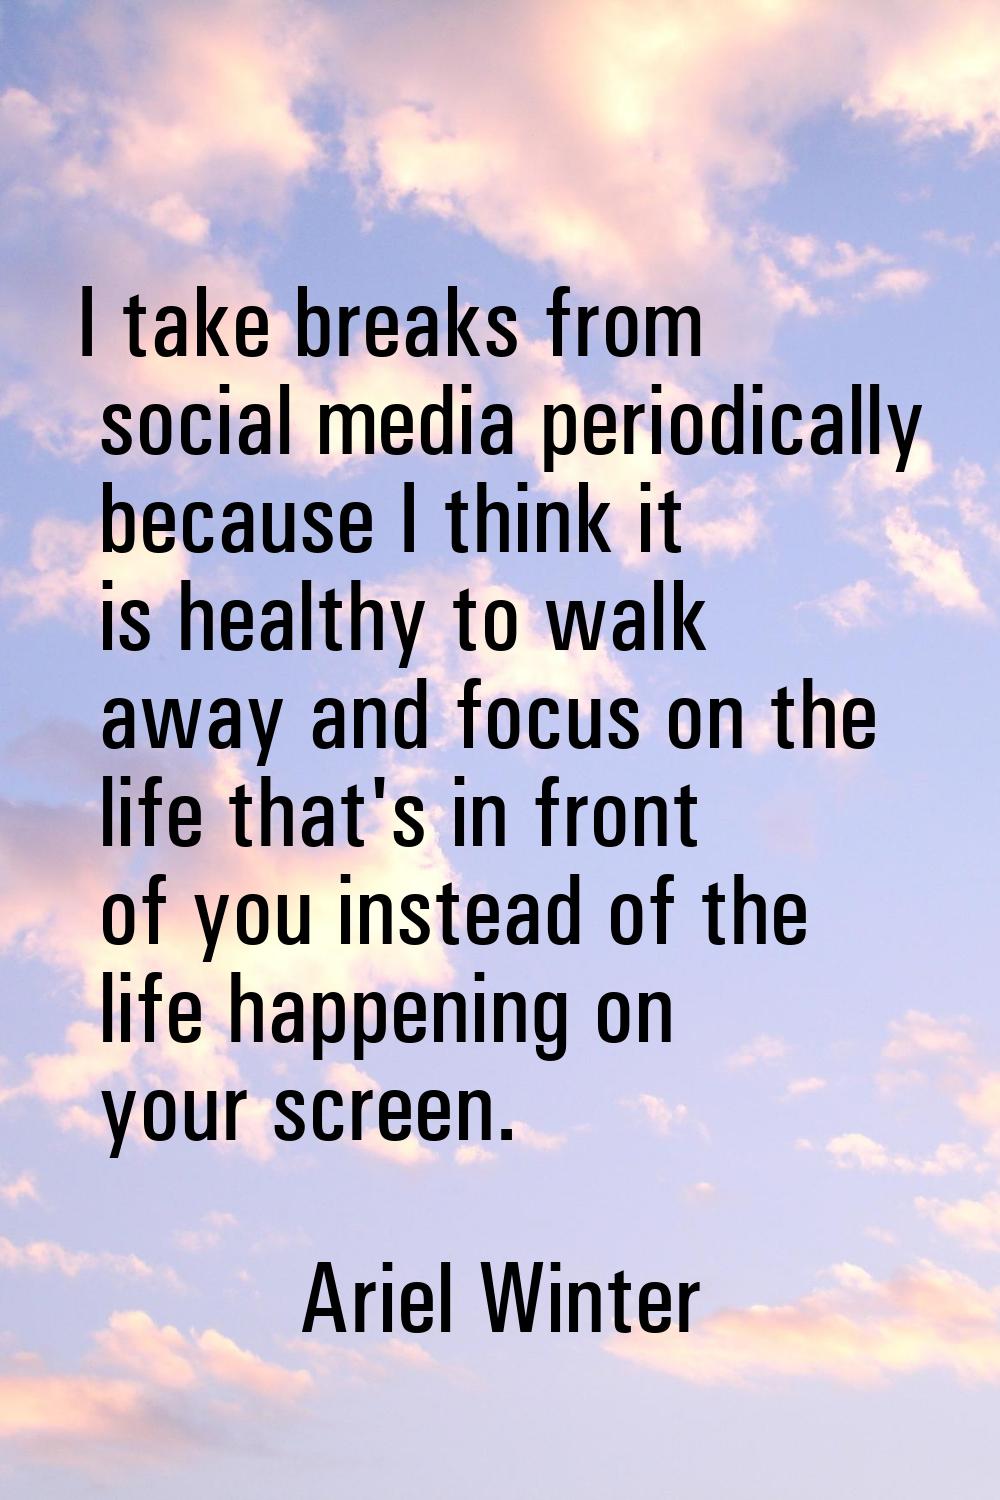 I take breaks from social media periodically because I think it is healthy to walk away and focus o